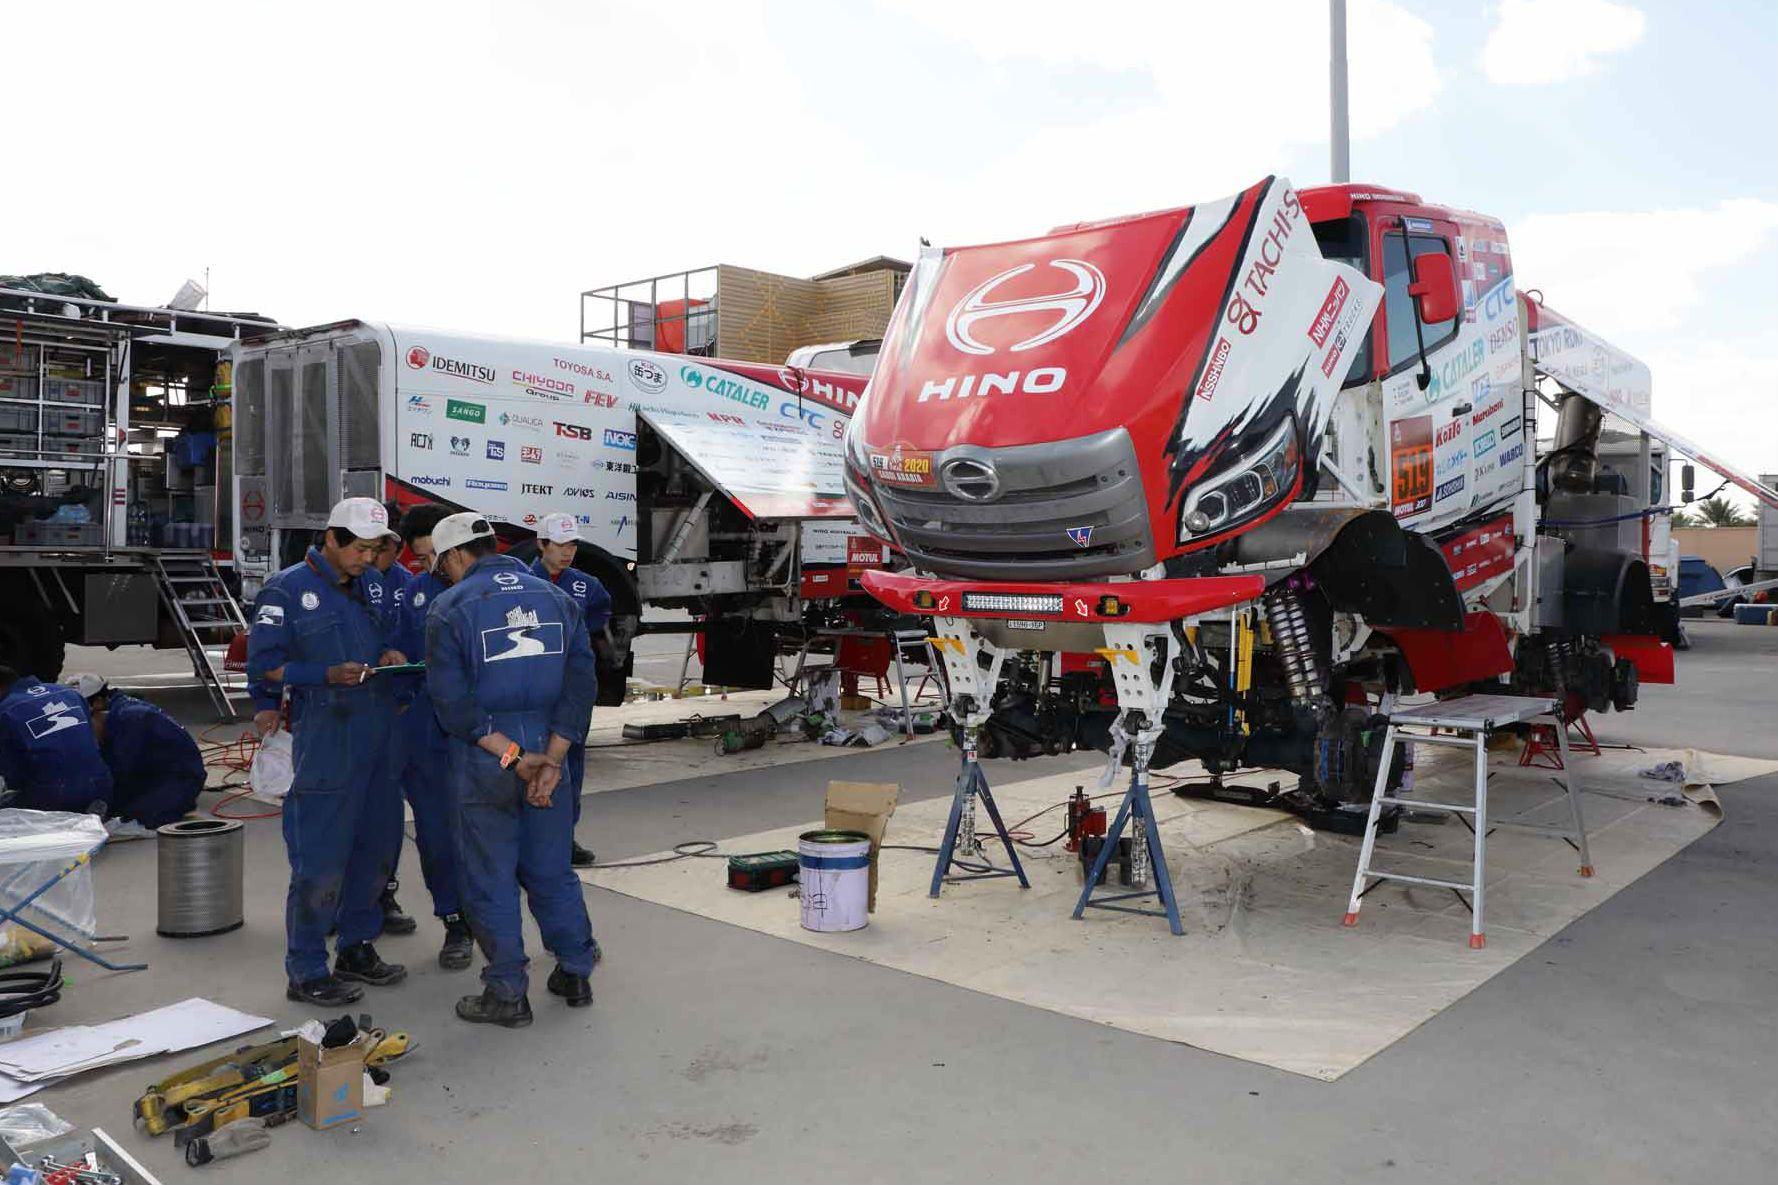 Rest day: Team completely refreshes its trucks on their rest day in Riyadh with the aim of climbing further up in rankings in the second half of the rally.